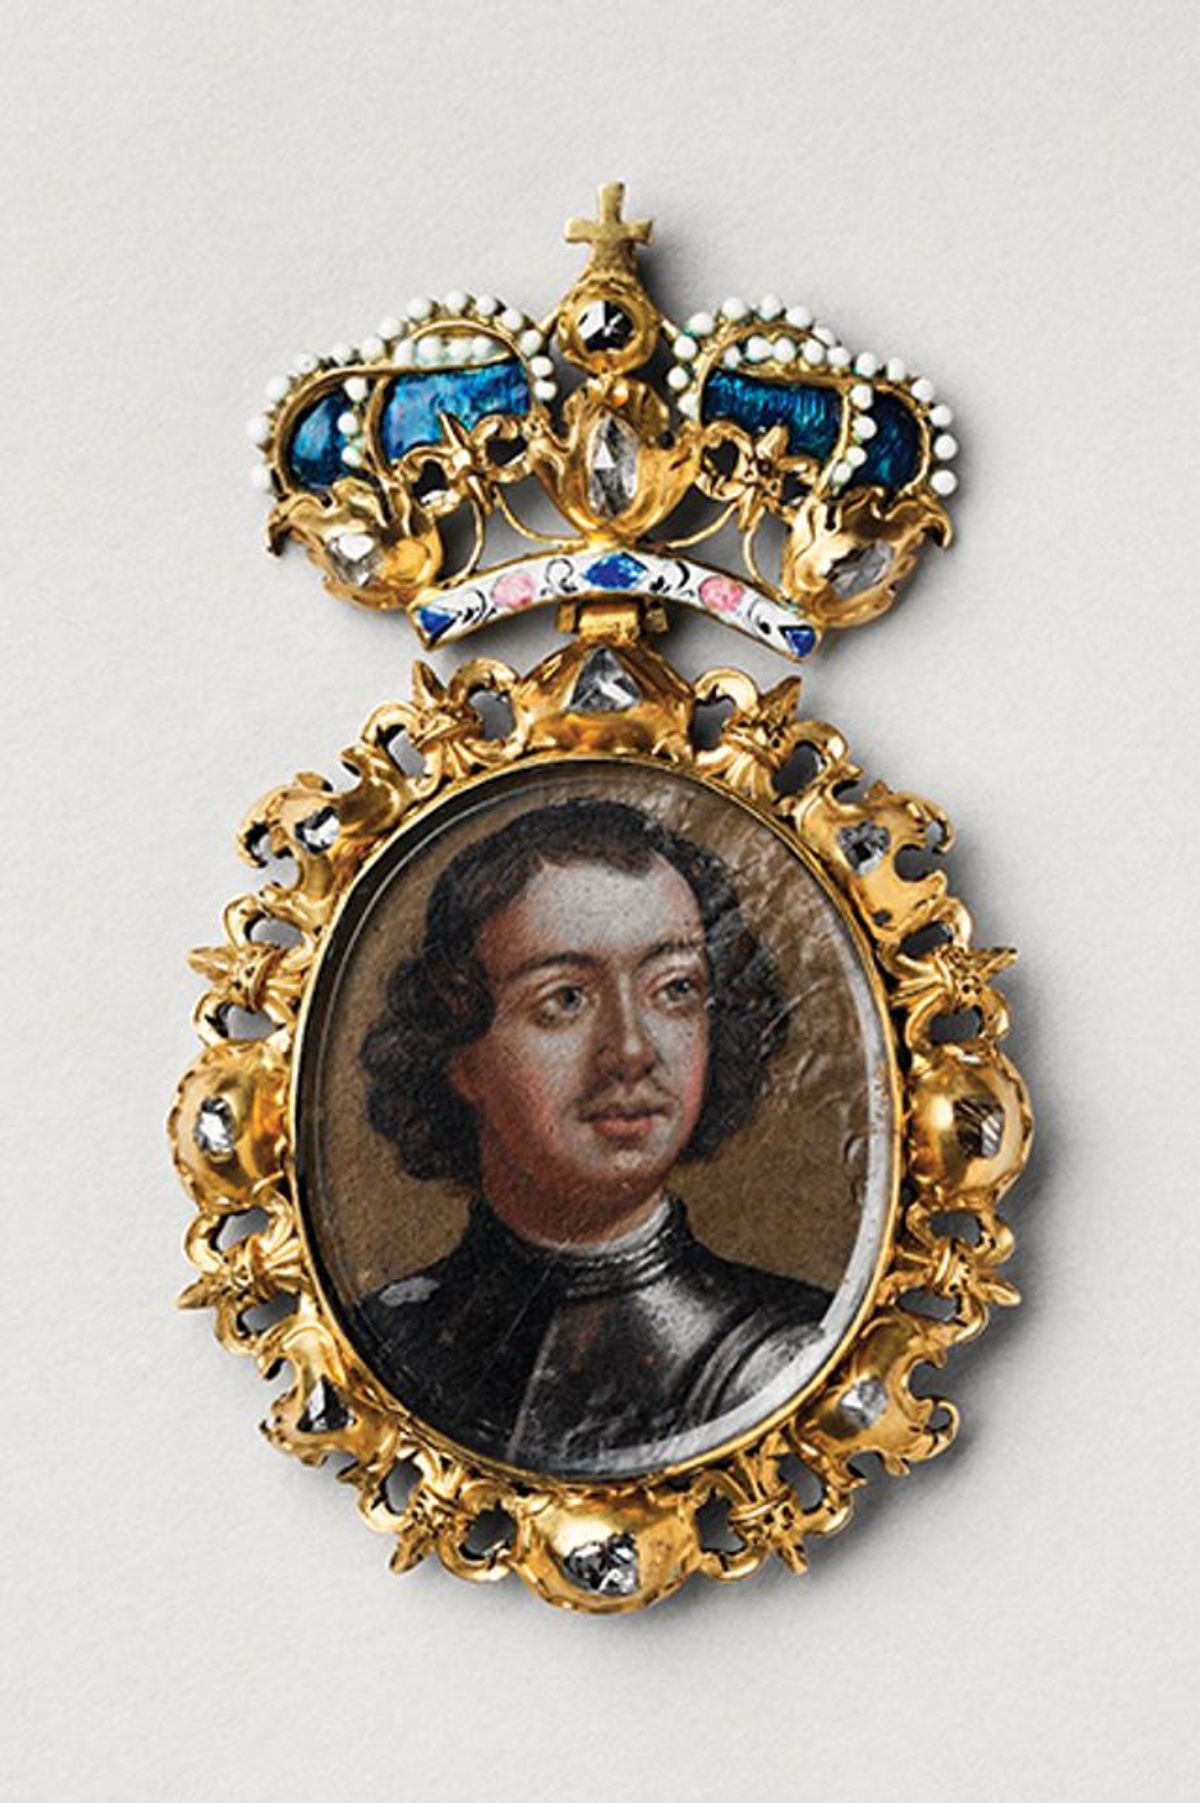 Portrait of Peter in a decorative objet d’art (early 18th century) © Courtesy of Moscow Kremlin Museums